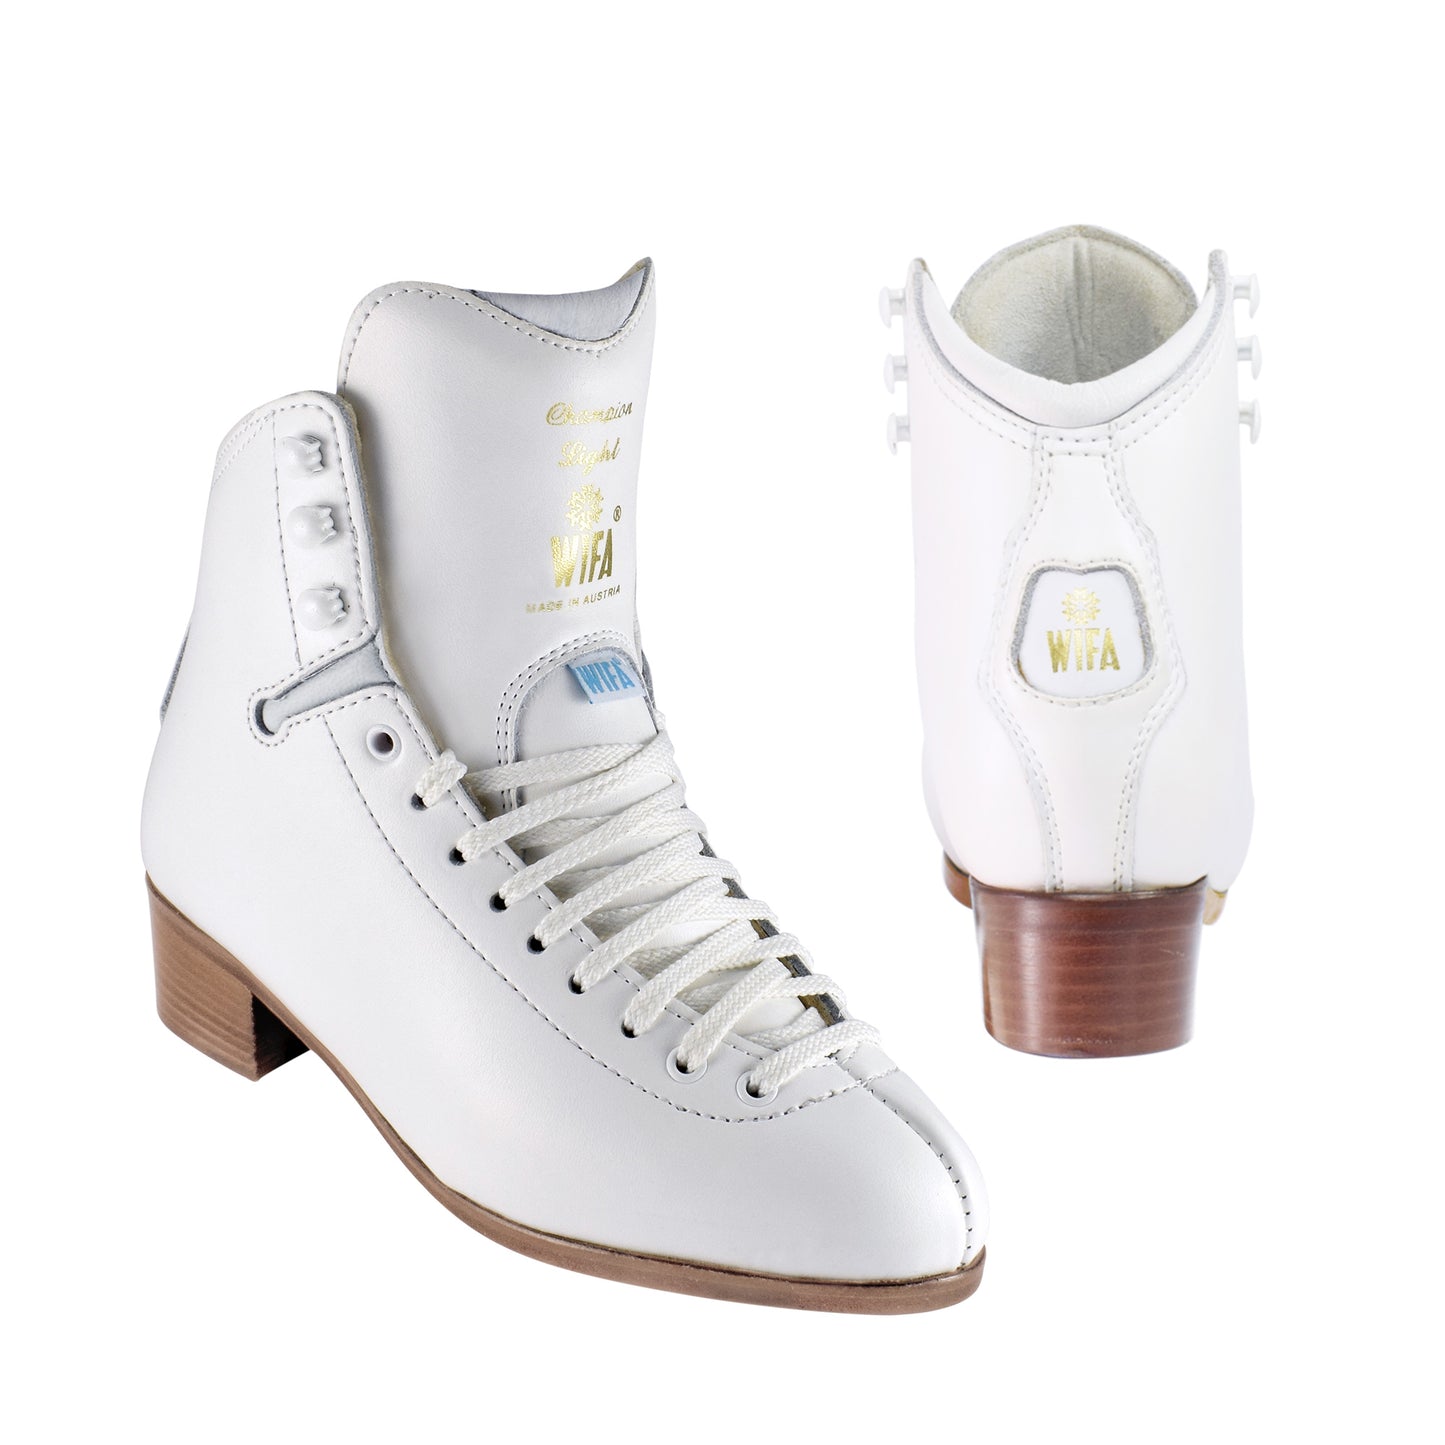 WIFA All Leather Champion Light (BOOT ONLY)